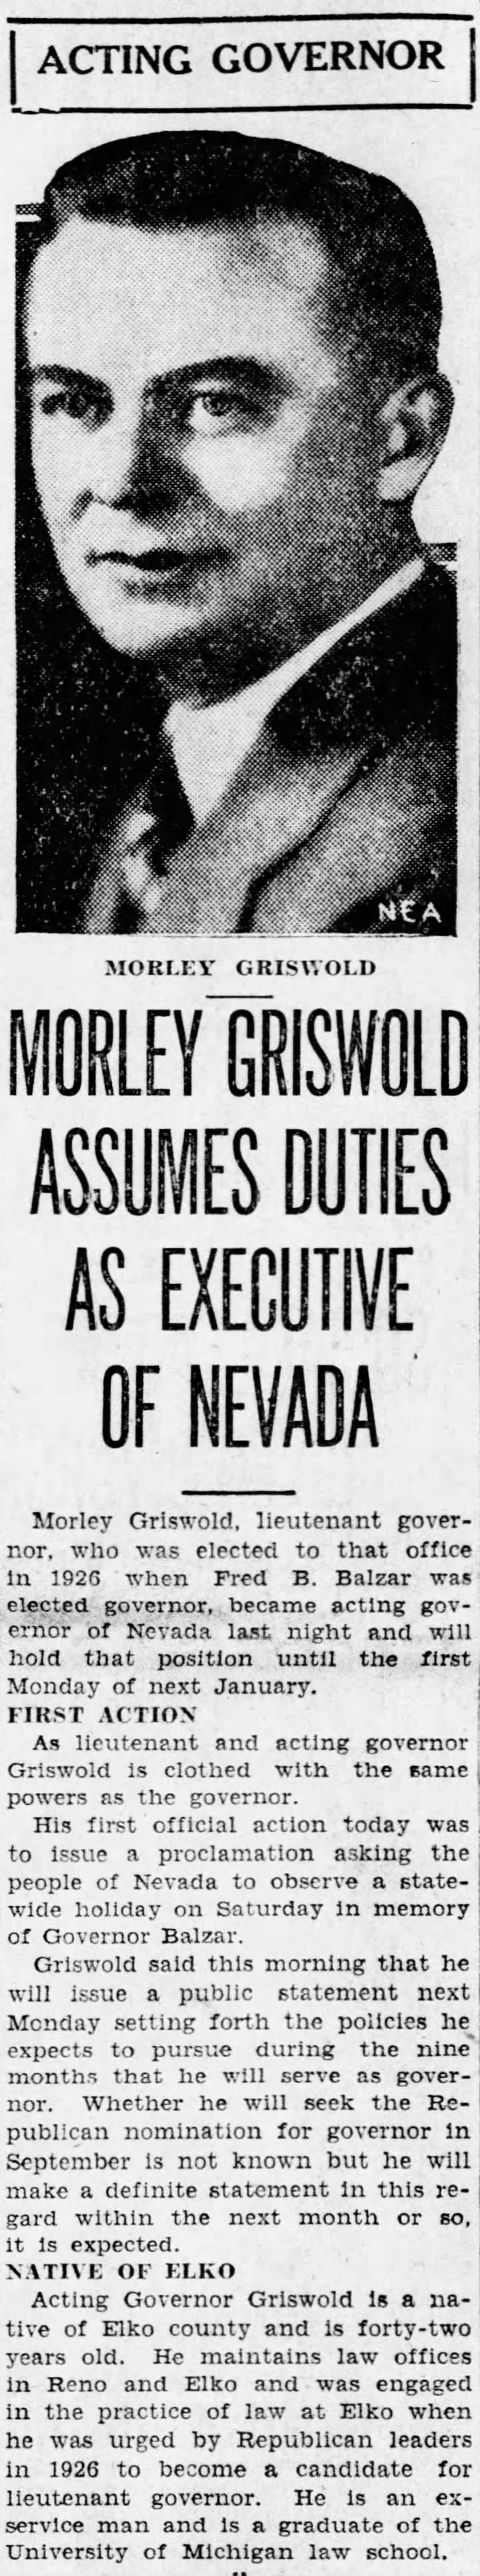 Morley Griswold Assumes Duties As Executive of Nevada